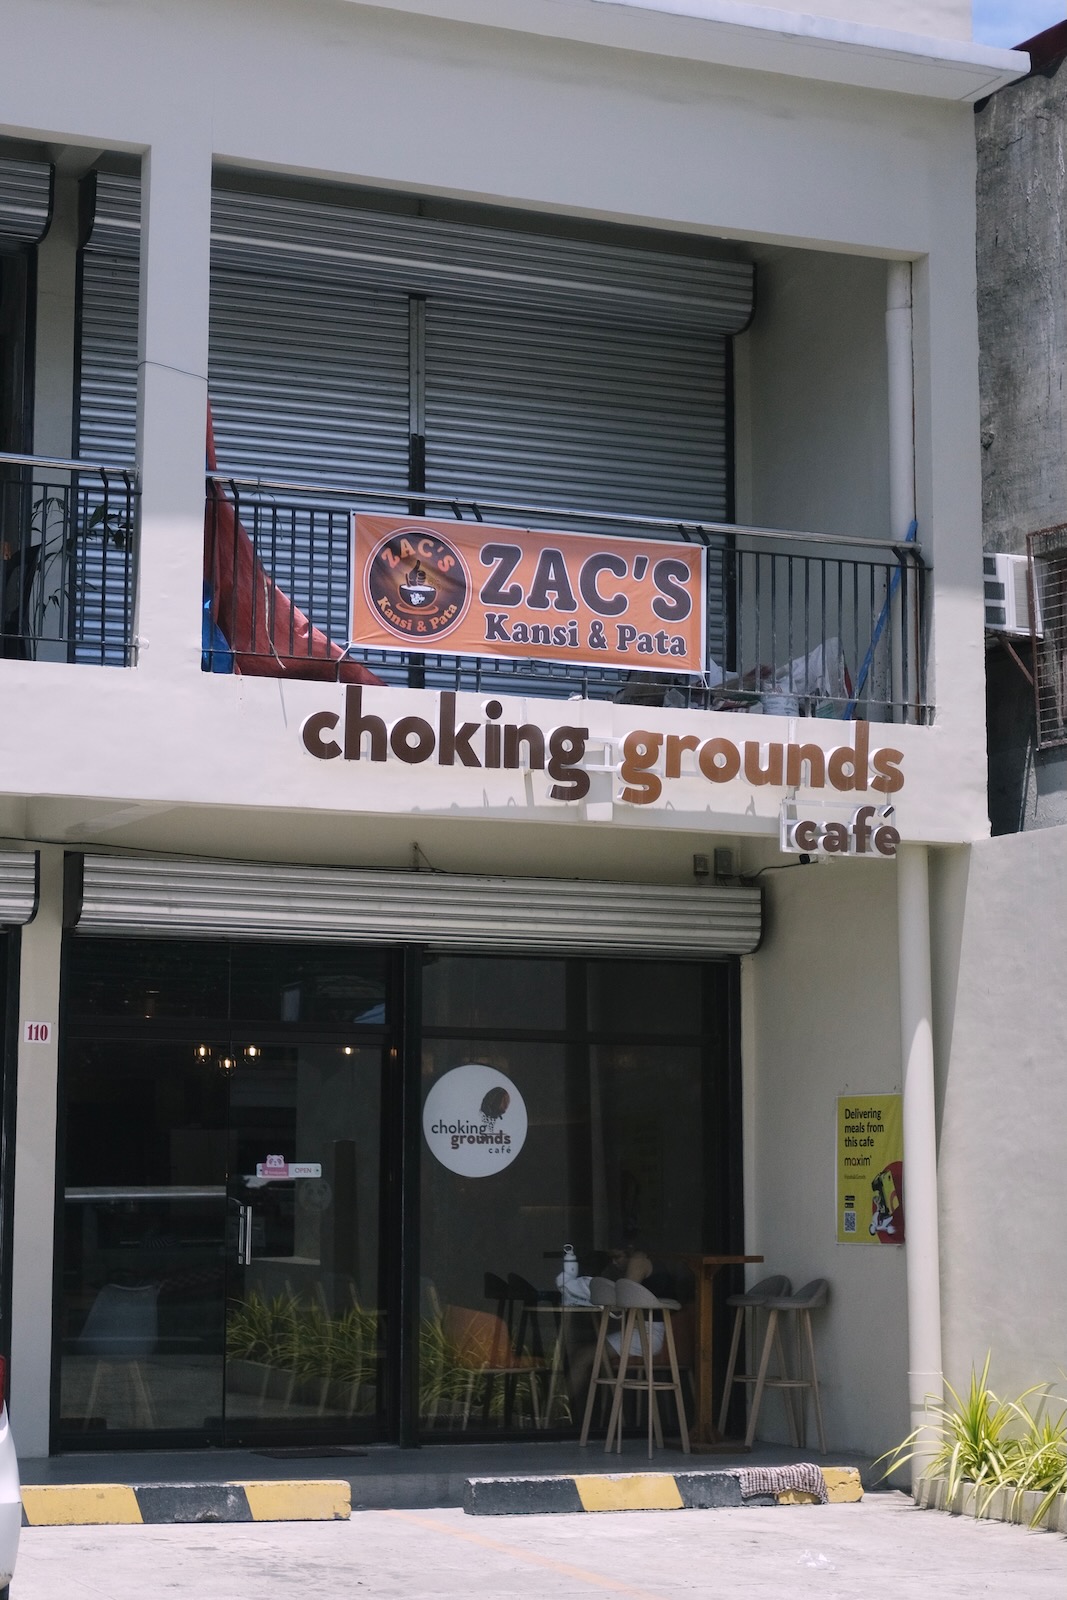 A coffee shop with the unfortunate name of “Choking Grounds”.